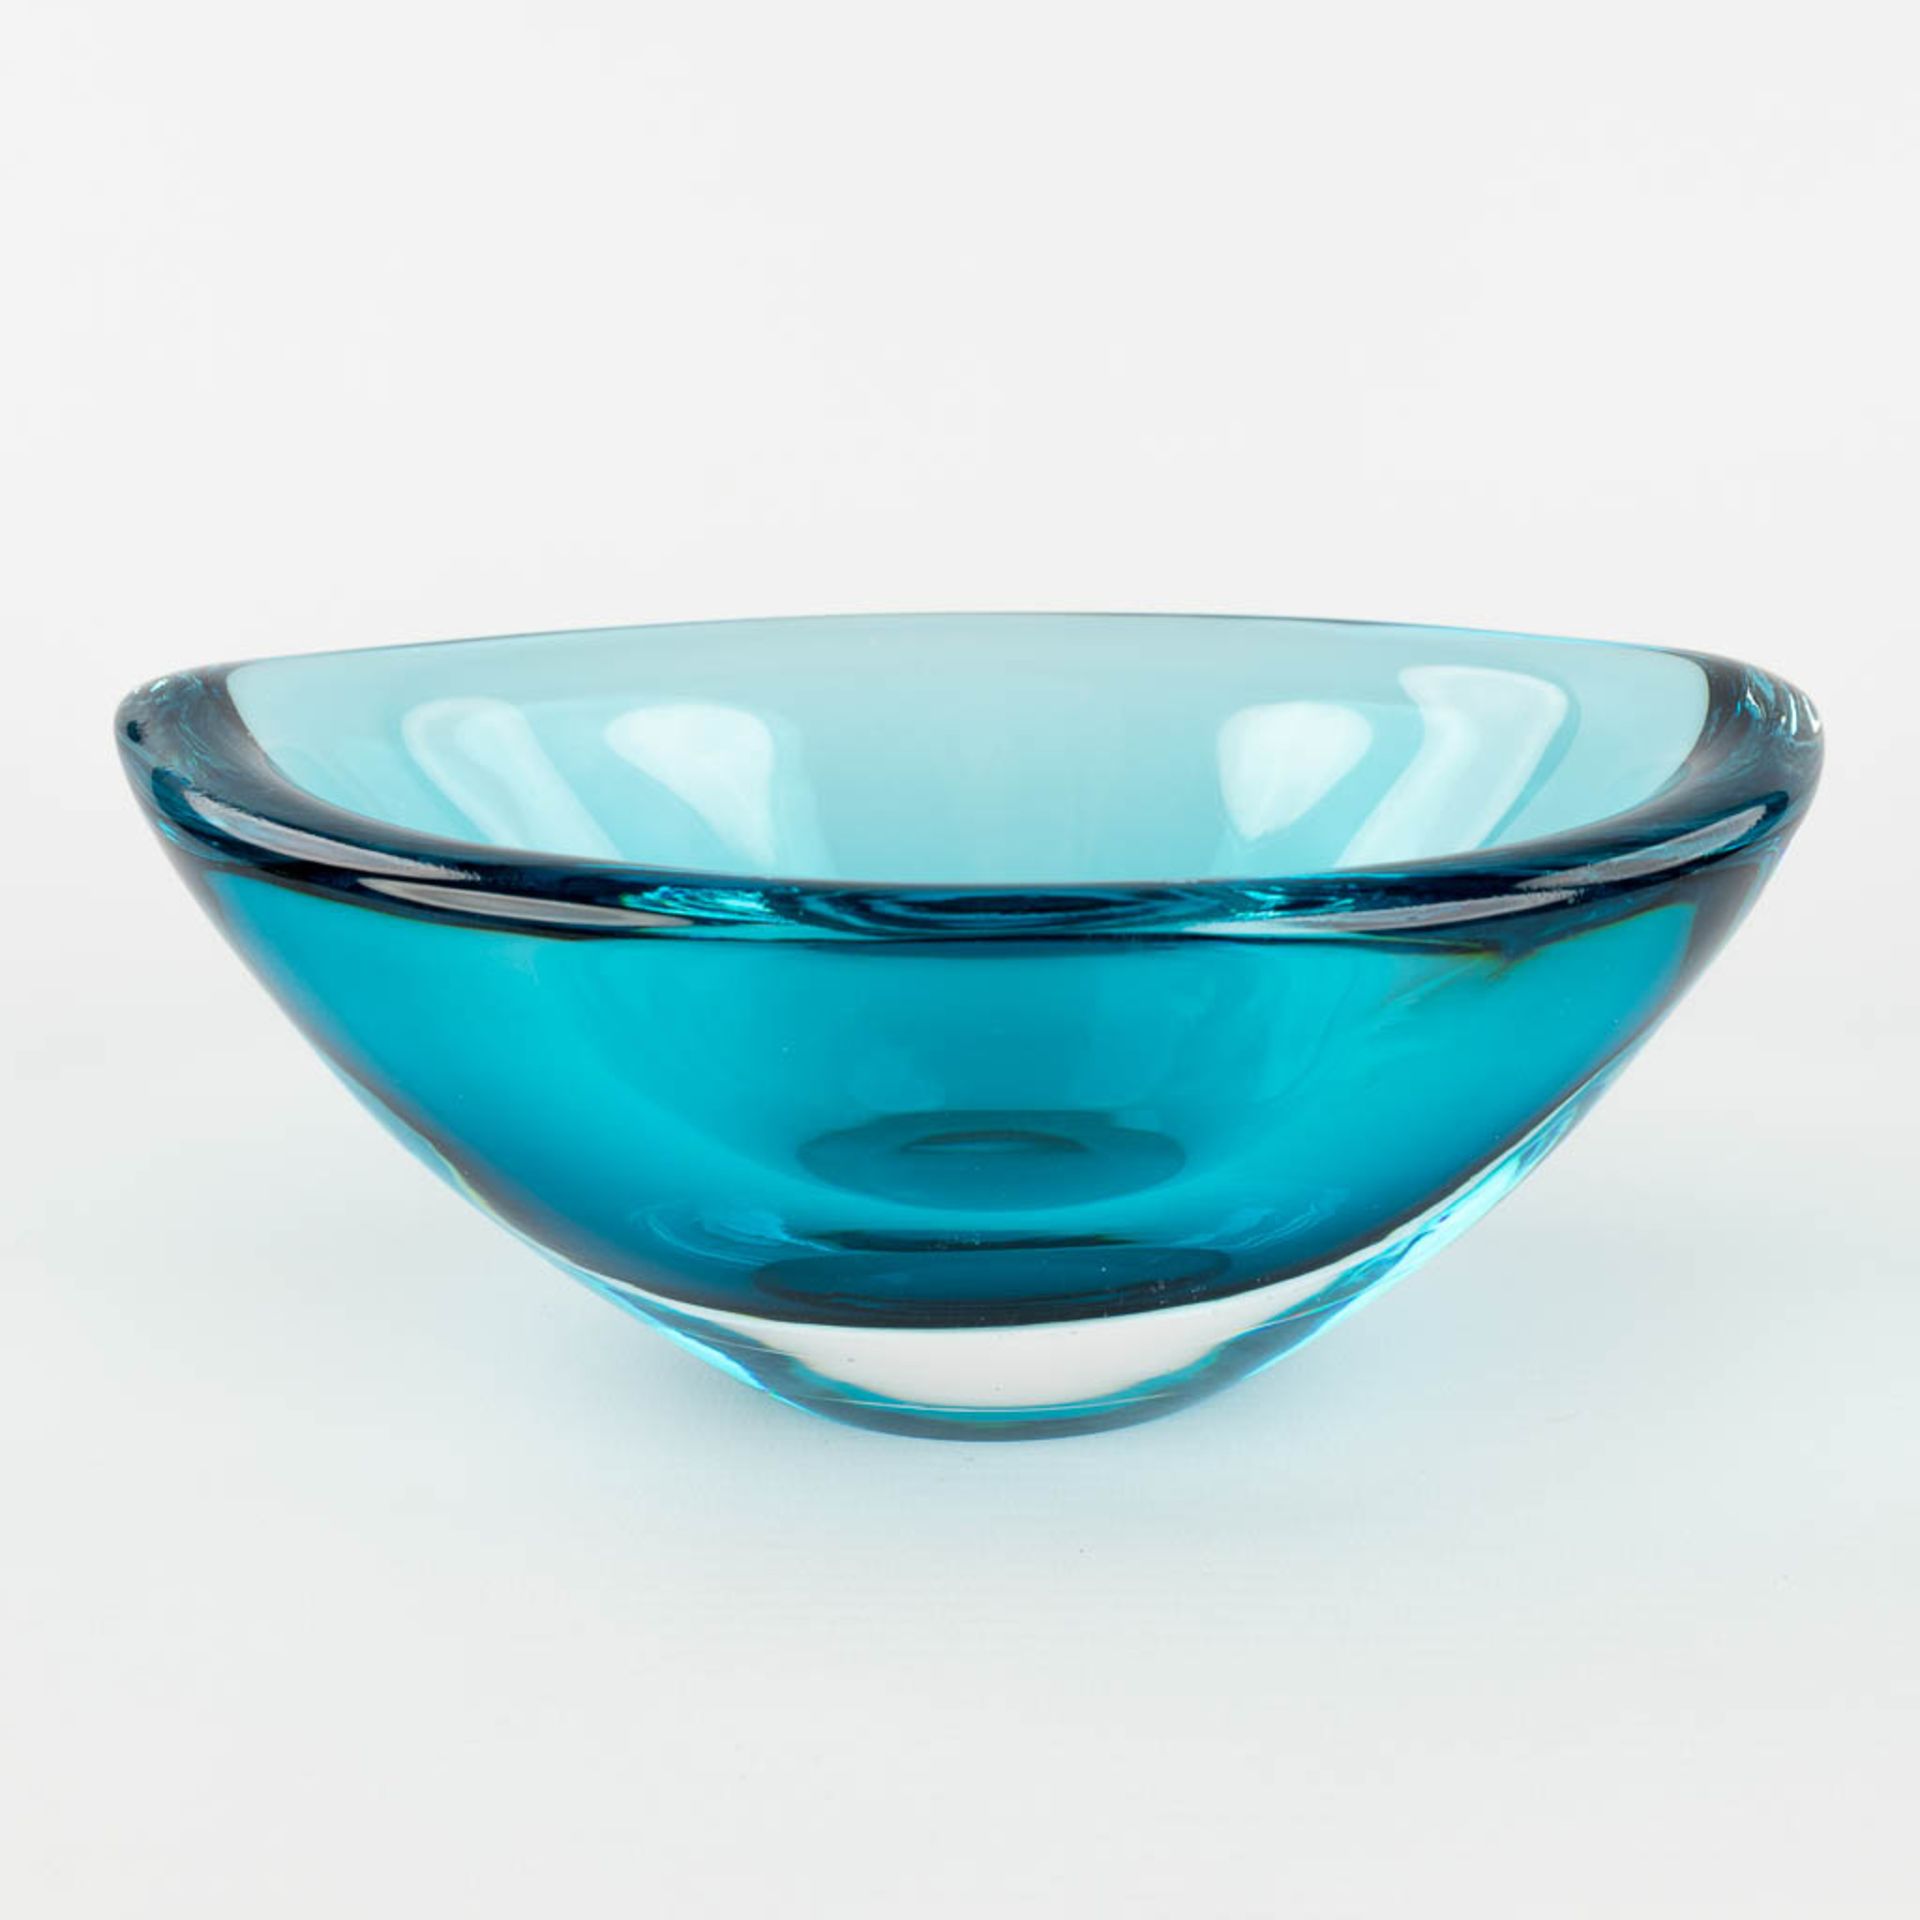 Val Saint Lambert, a bowl on a base, added a bowl in blue glass. (L: 10 x W: 21 x H: 15 cm) - Image 5 of 16